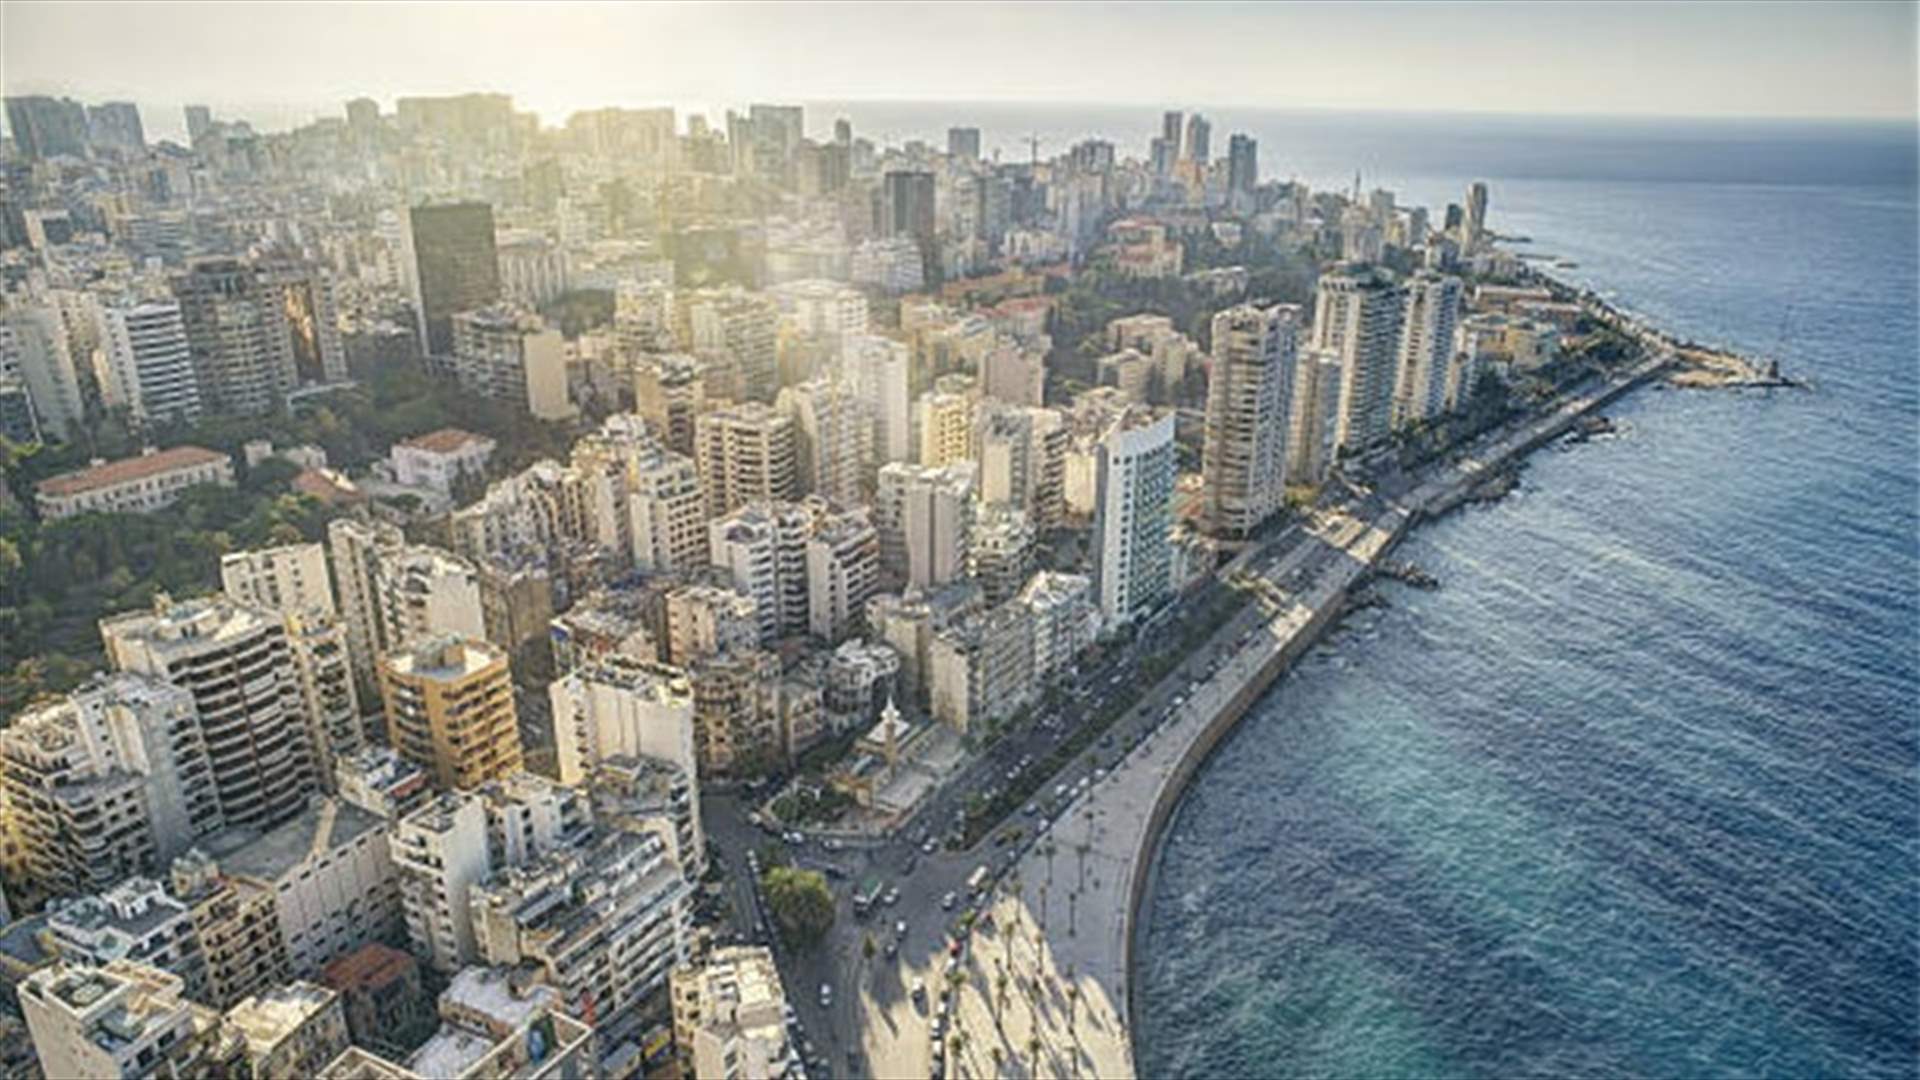 Lebanon in 2023: A demographic bomb on verge of exploding